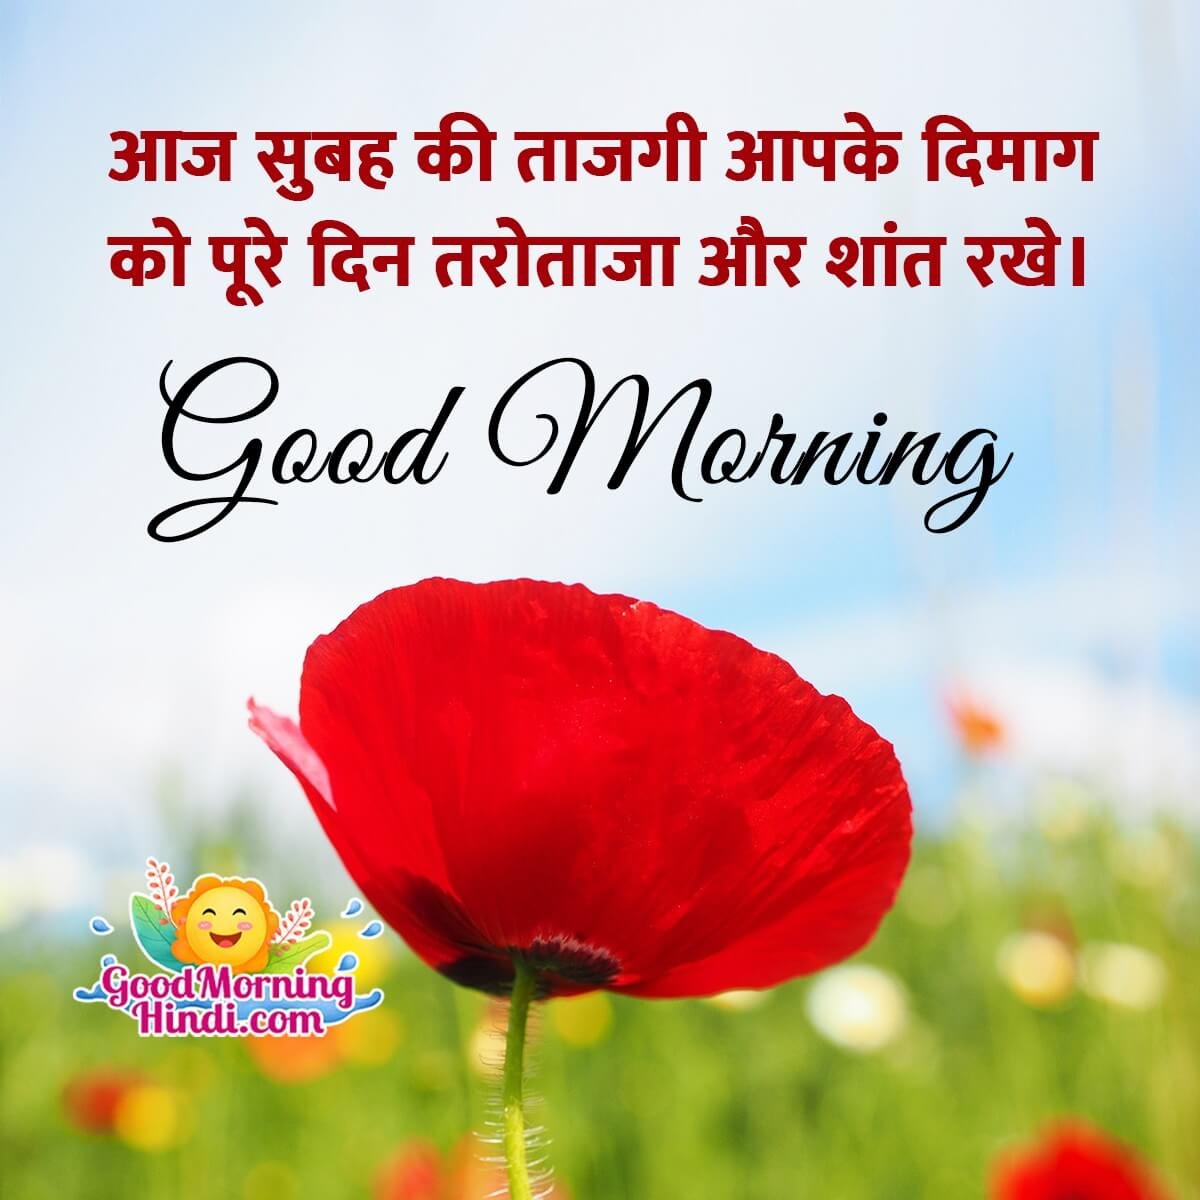 Best Good Morning Wishes In Hindi - Good Morning Wishes & Images ...